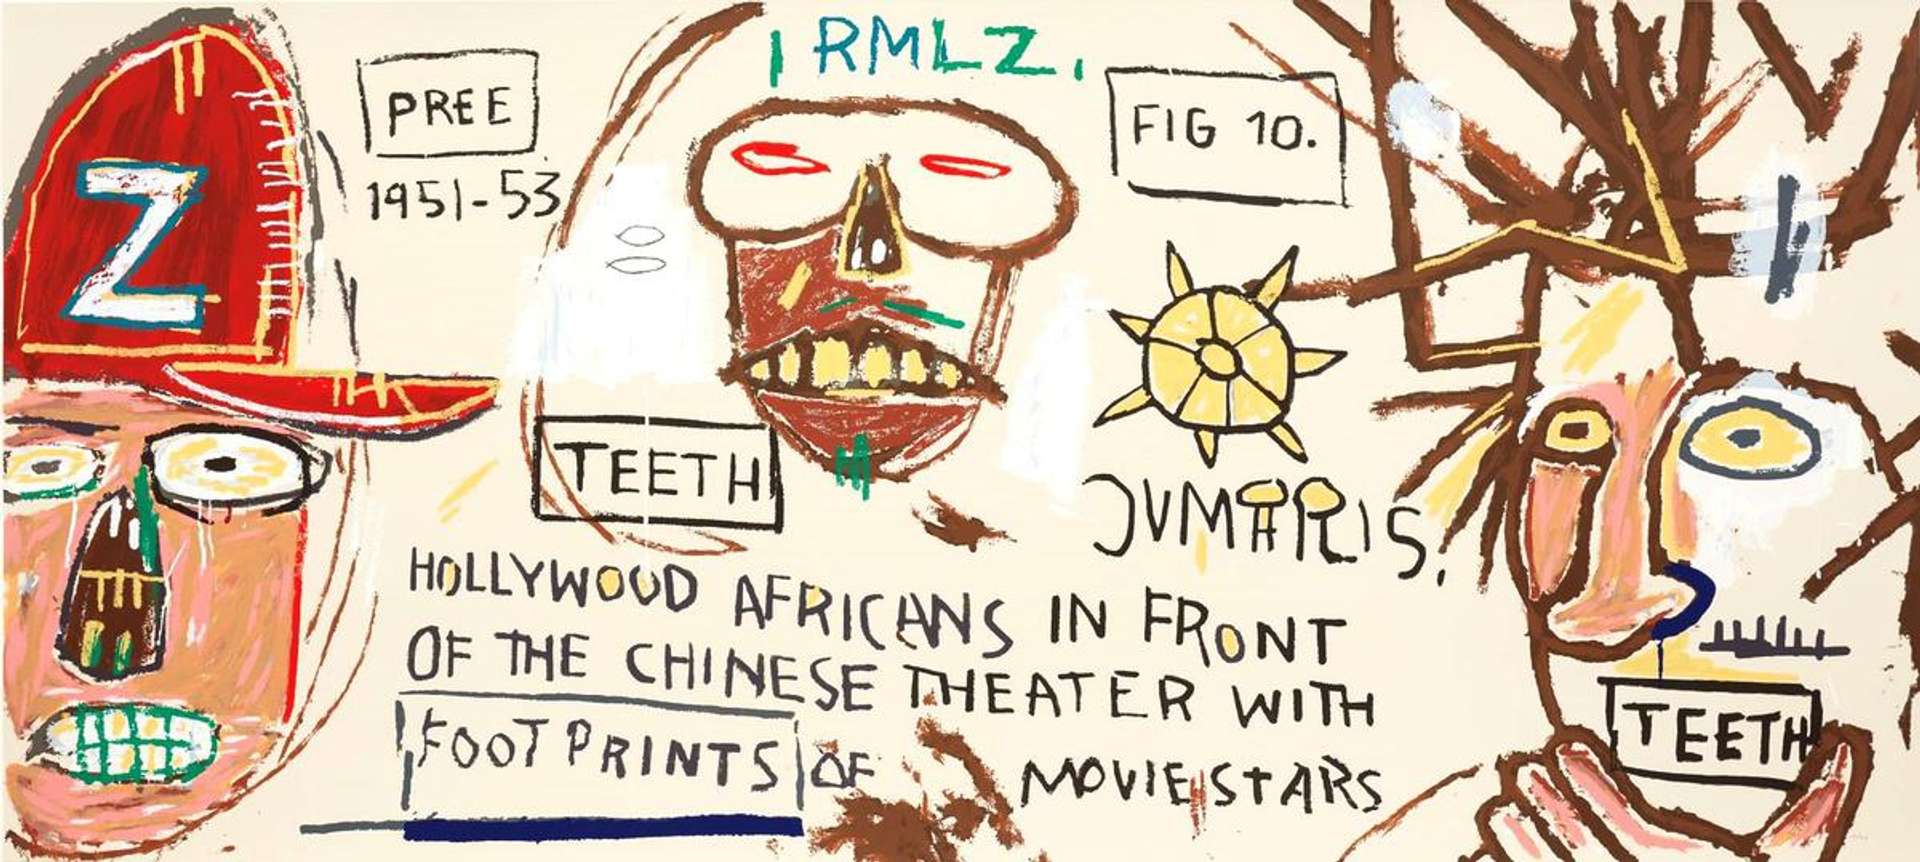 Hollywood Africans In Front Of The Chinese Theatre With Footprints Of Movie Stars - Unsigned Print by Jean-Michel Basquiat 2015 - MyArtBroker